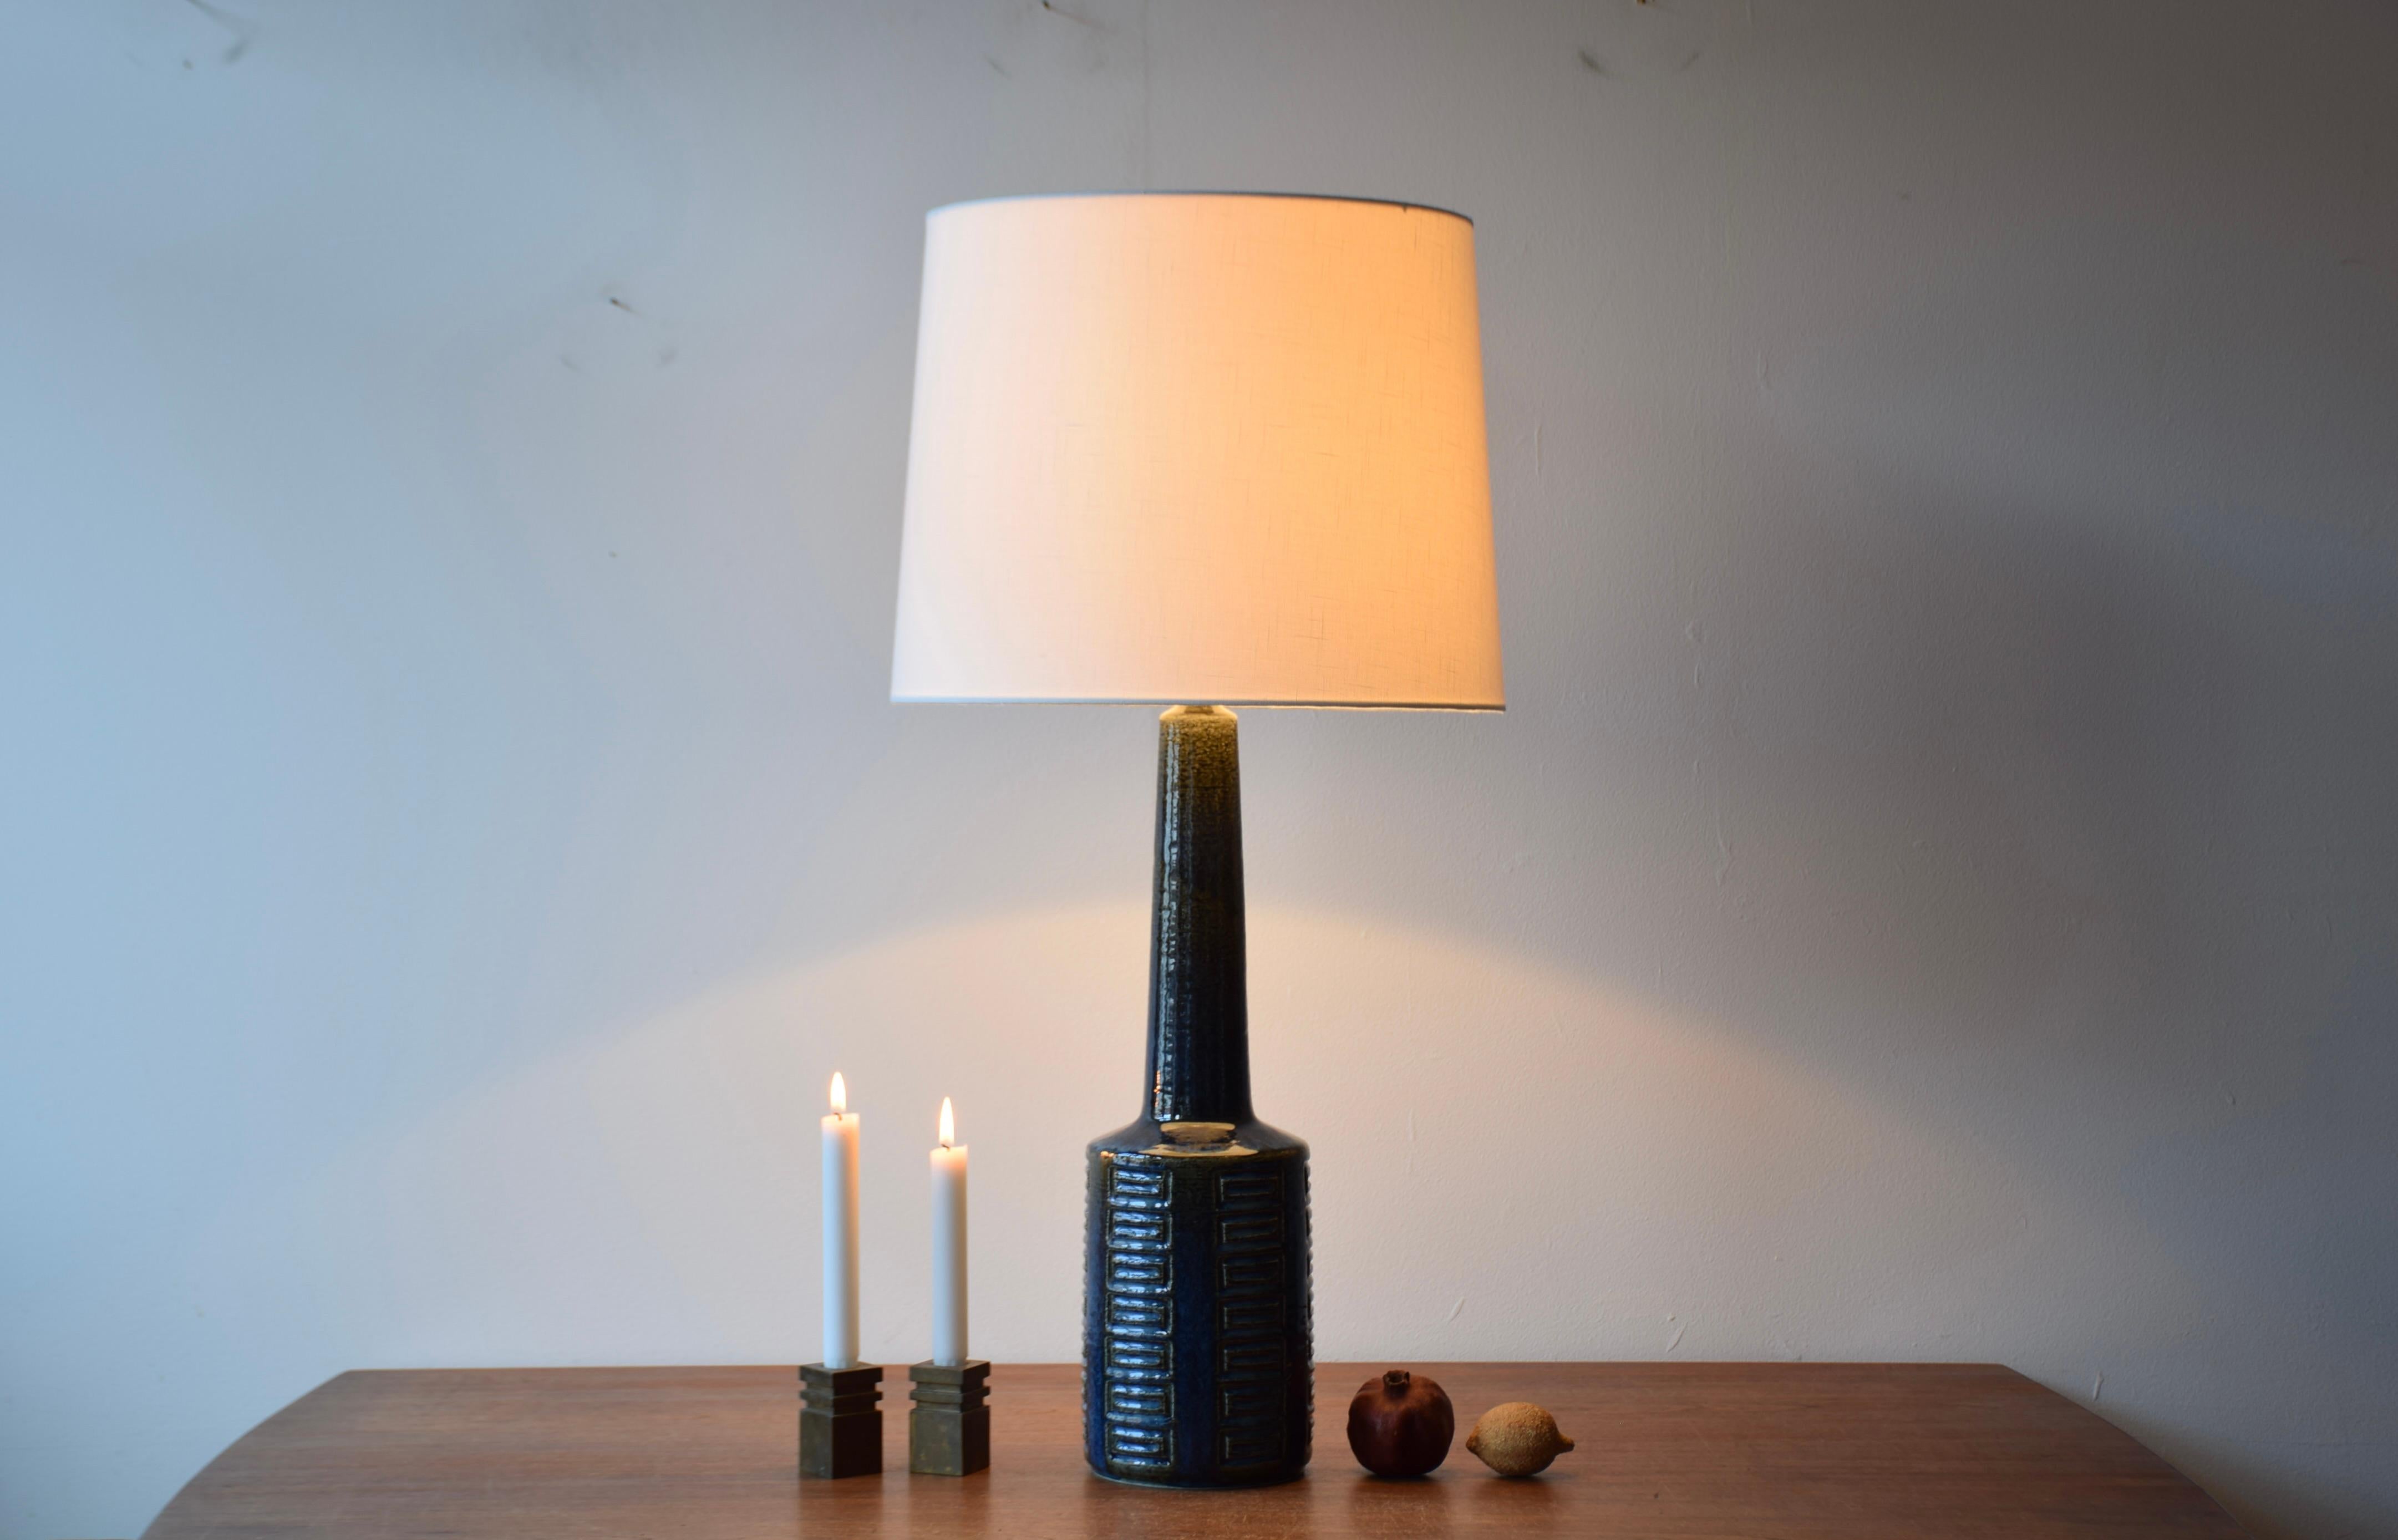 Very tall Danish Midcentury ceramic table lamp from the ceramic workshop Palshus. 

The lamp was designed by Per Linnemann-Schmidt and manufactured circa 1960s or early 1970s.

It is made with chamotte clay which gives a rough and vivid surface. The